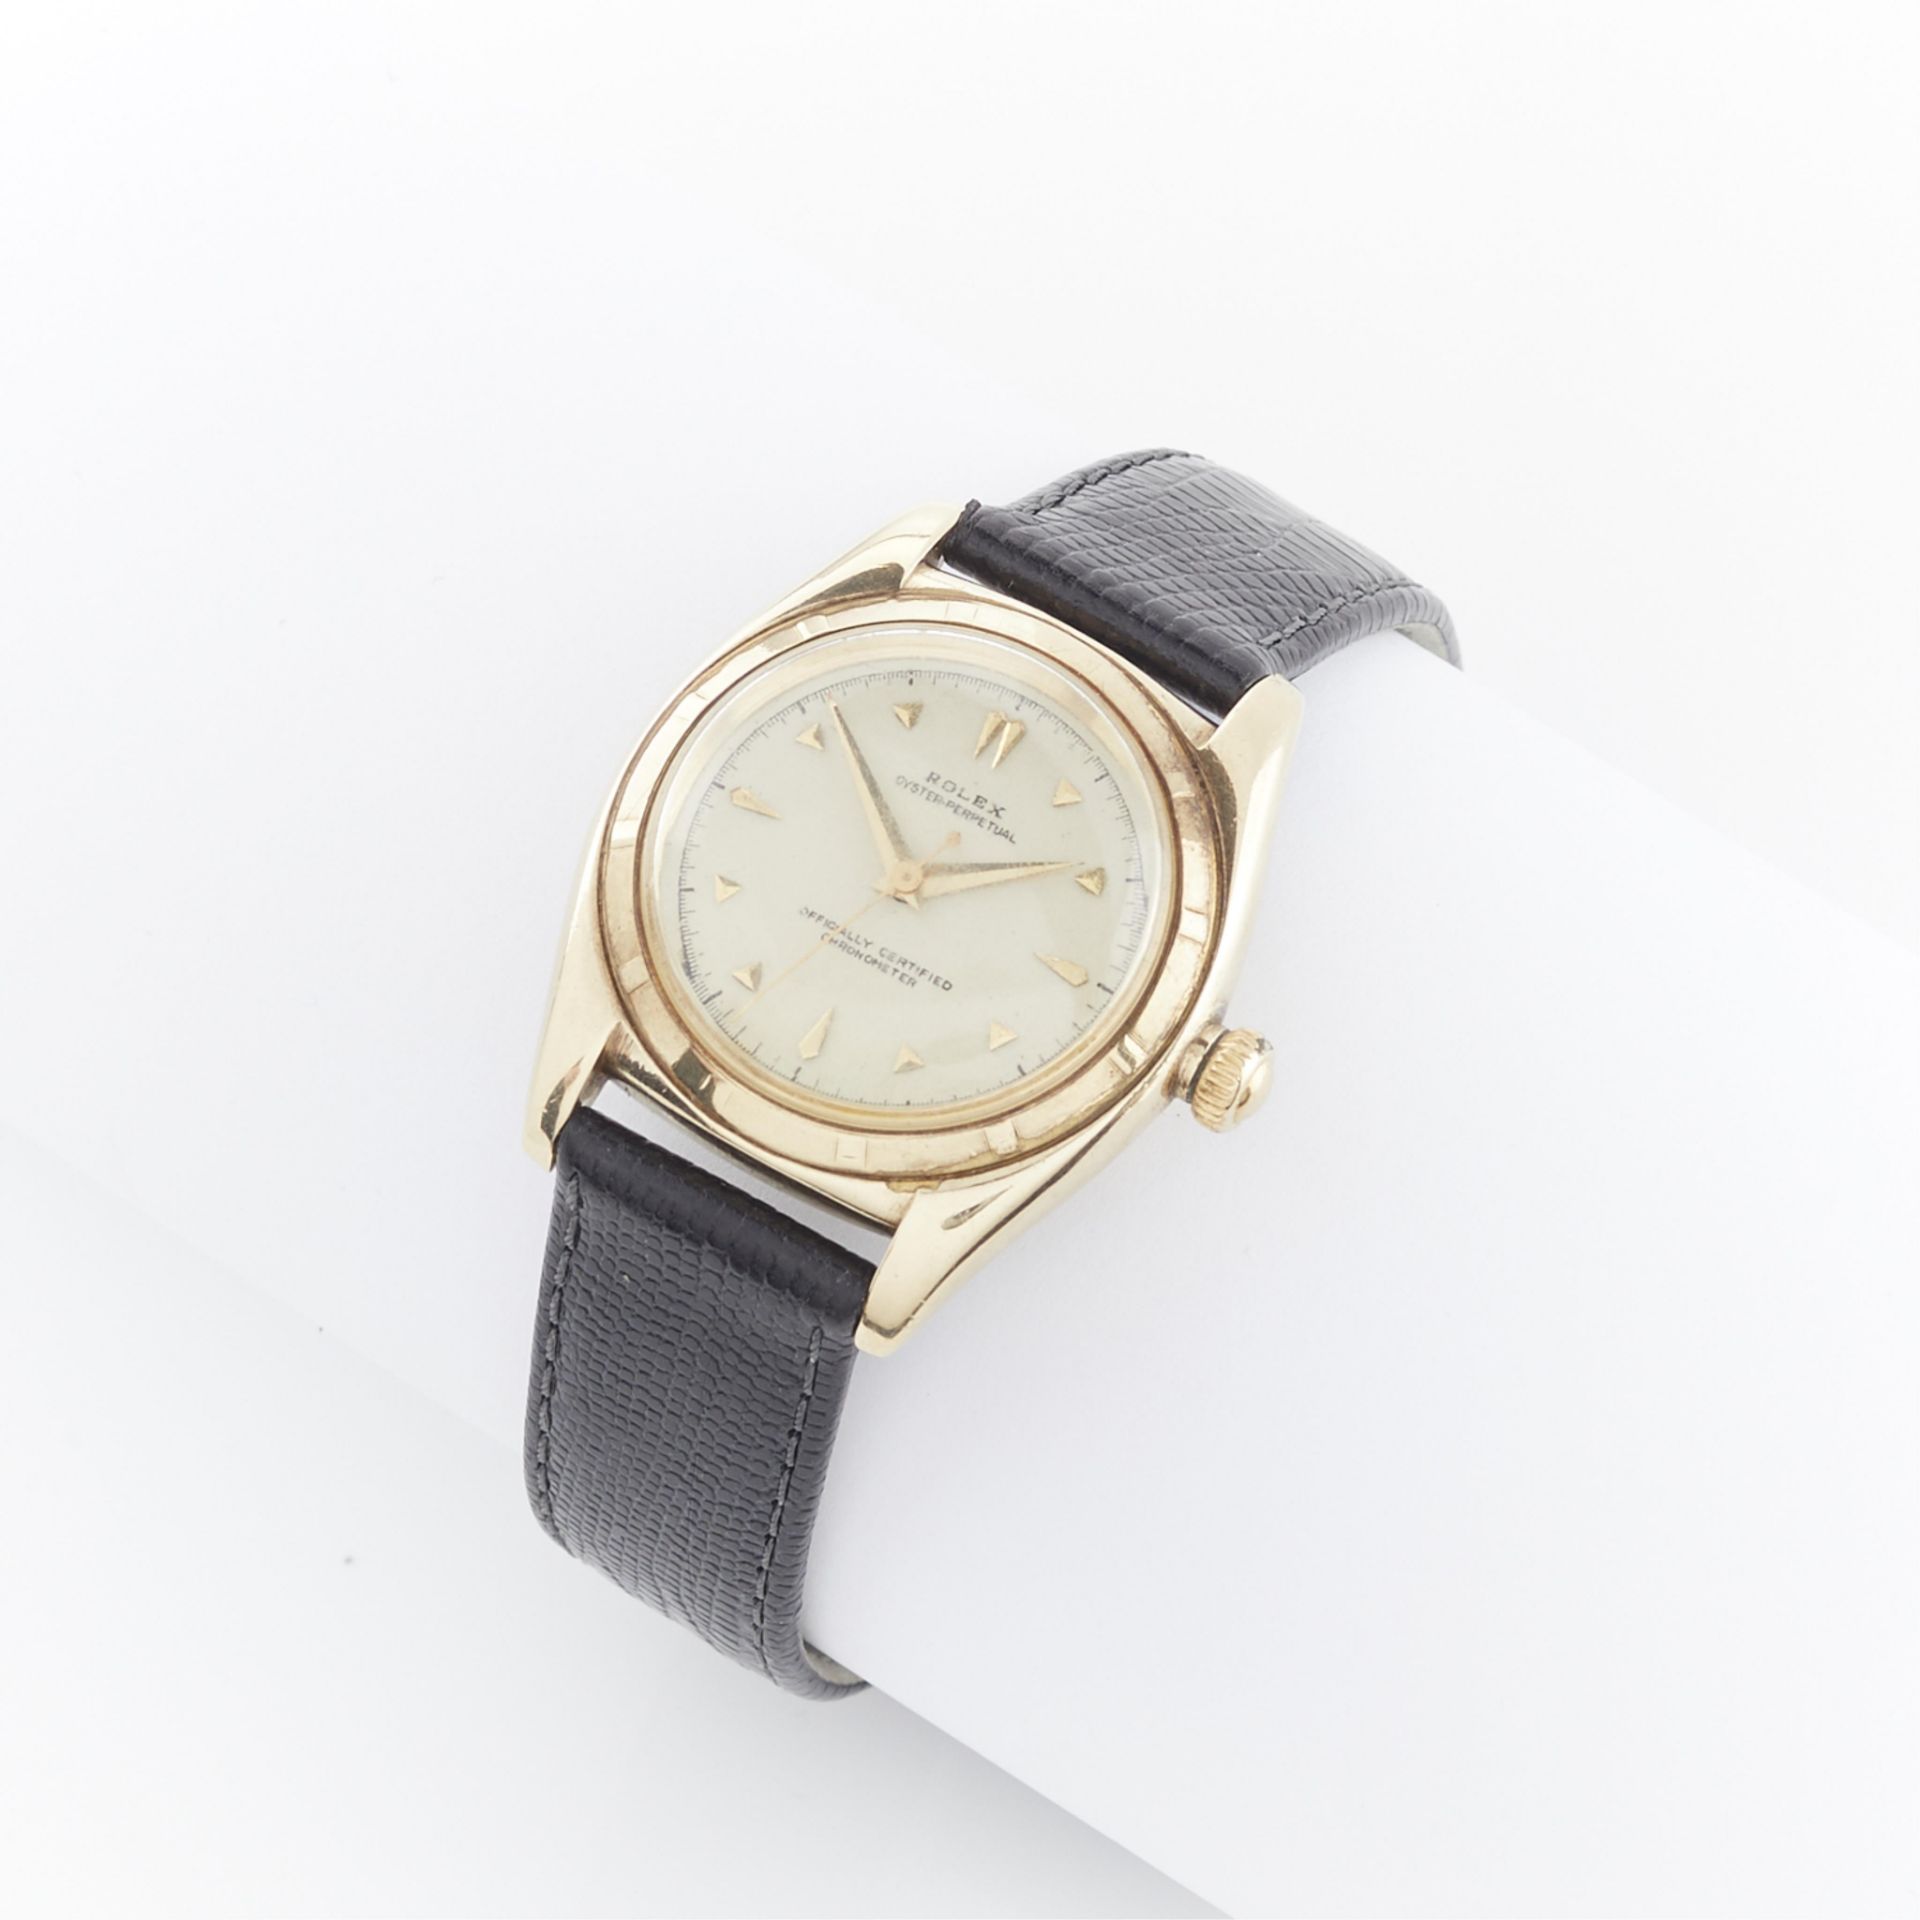 14k Rolex Oyster Perpetual 4777 Bubble Back